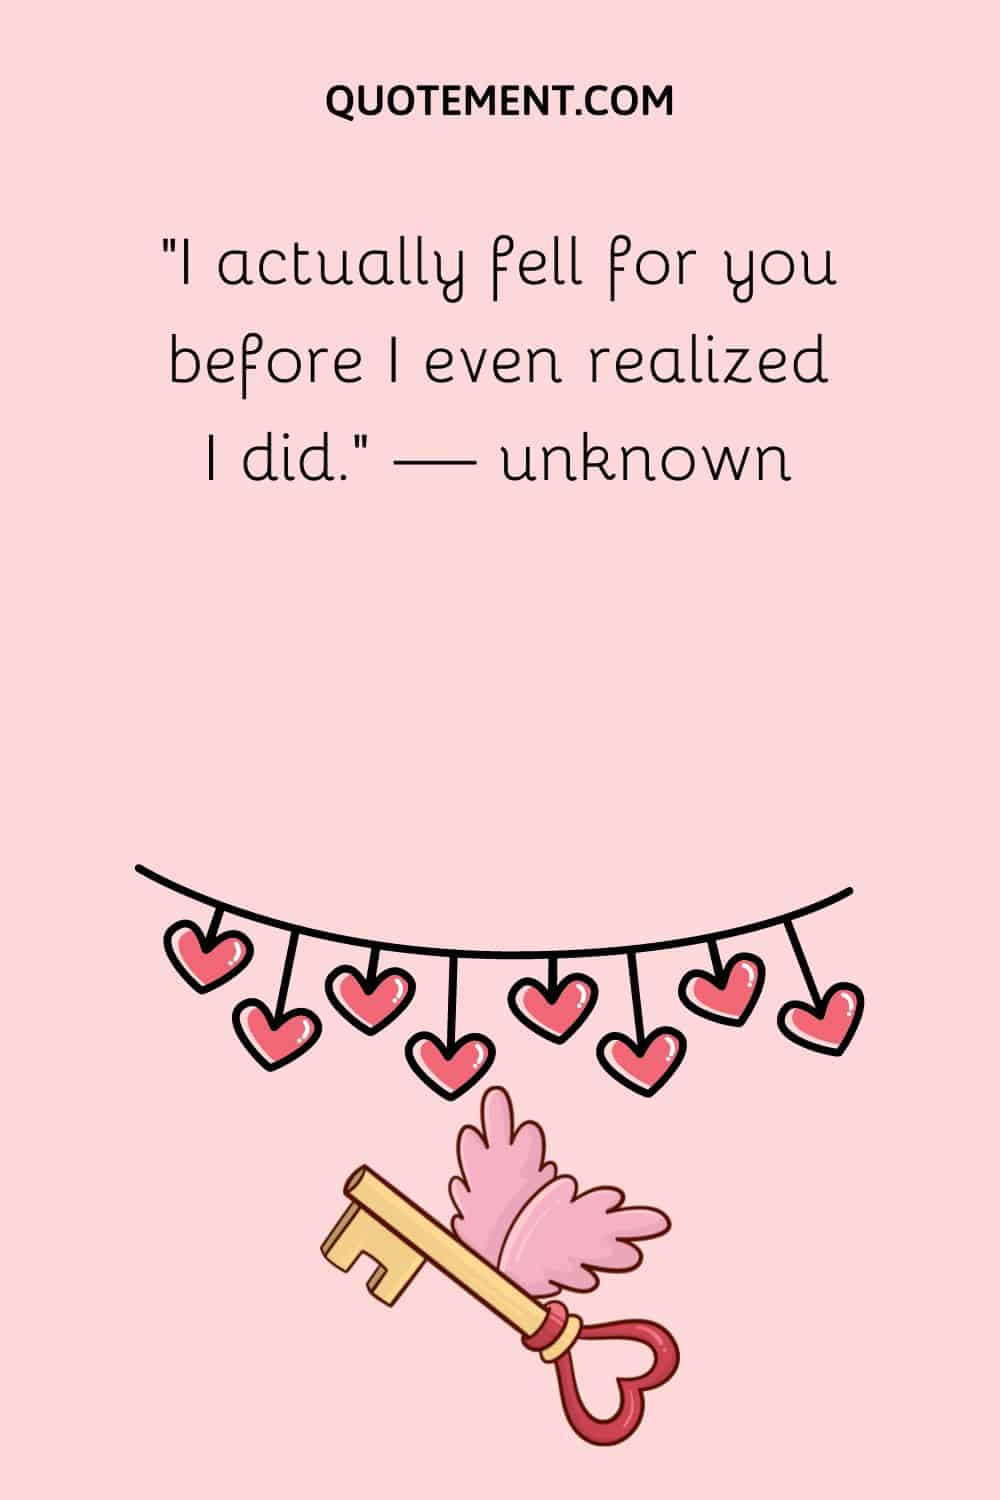 “I actually fell for you before I even realized I did.” — unknown